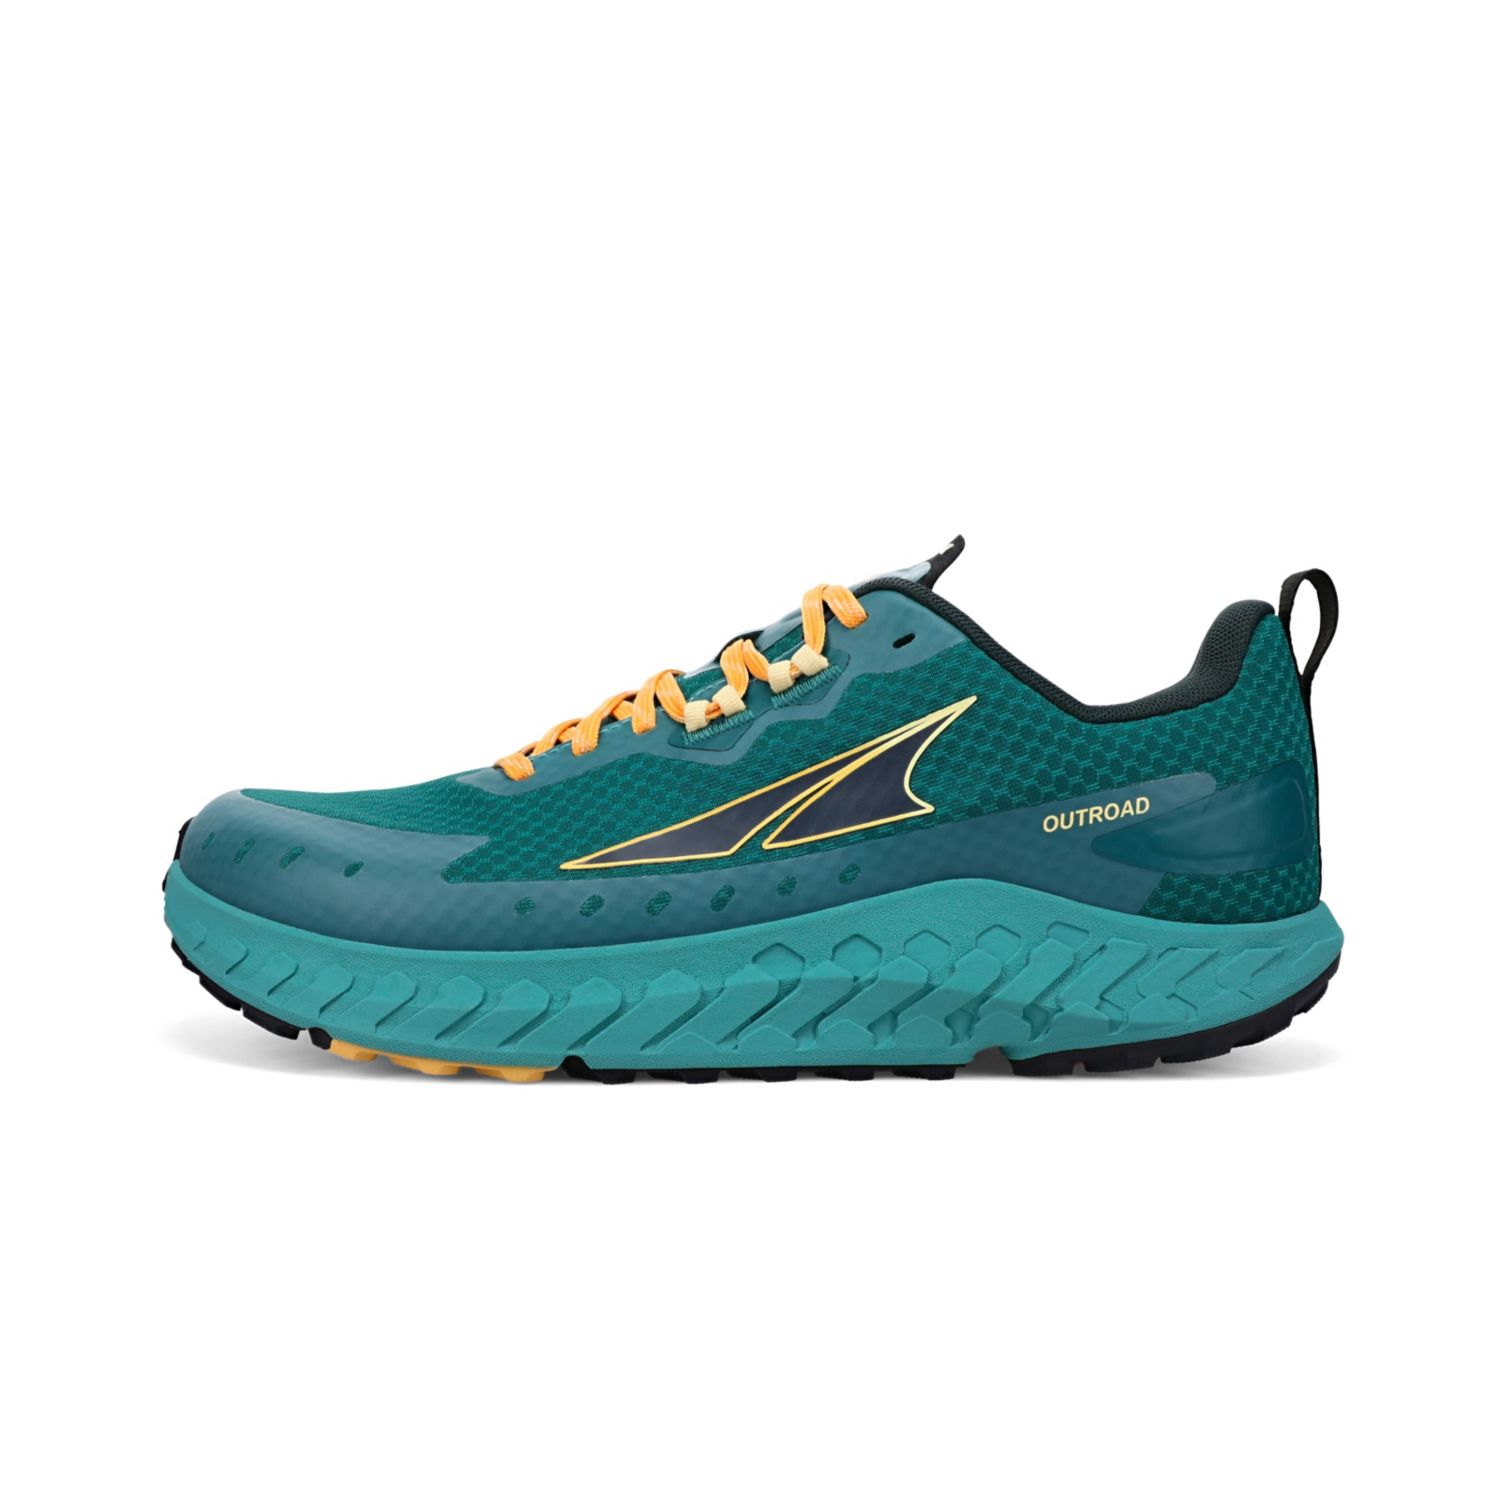 Deep Turquoise Men's Altra Outroad Road Running Shoes | UAE-81675039